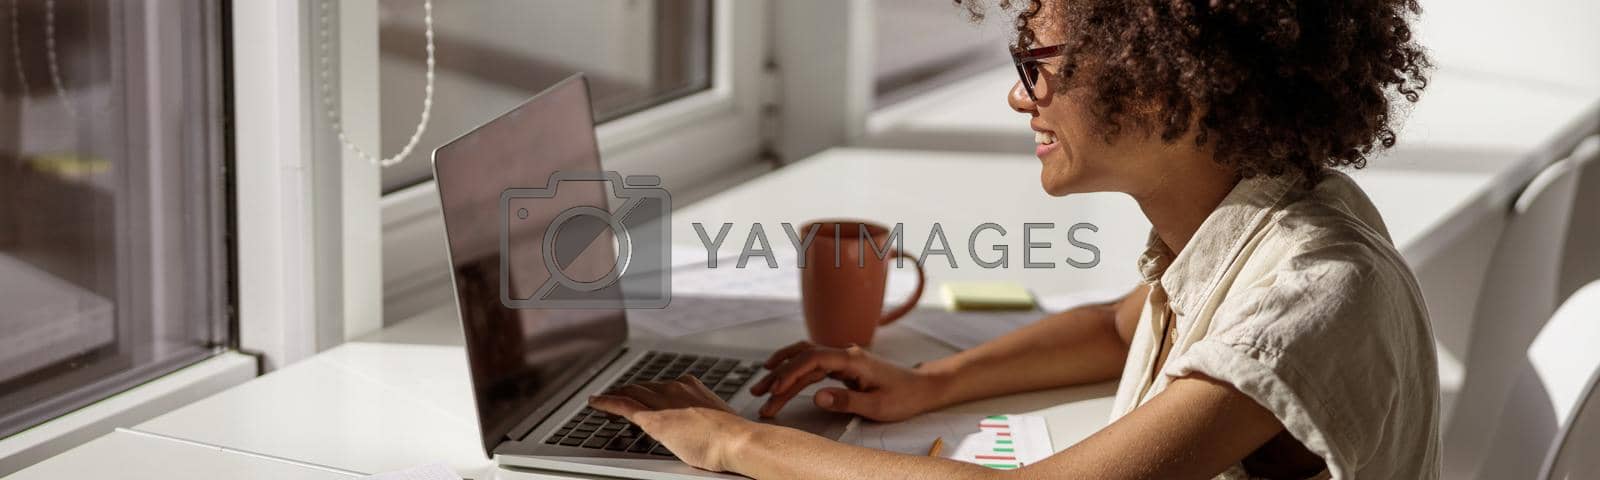 Royalty free image of African American woman concentrated looking at computer screen by Yaroslav_astakhov